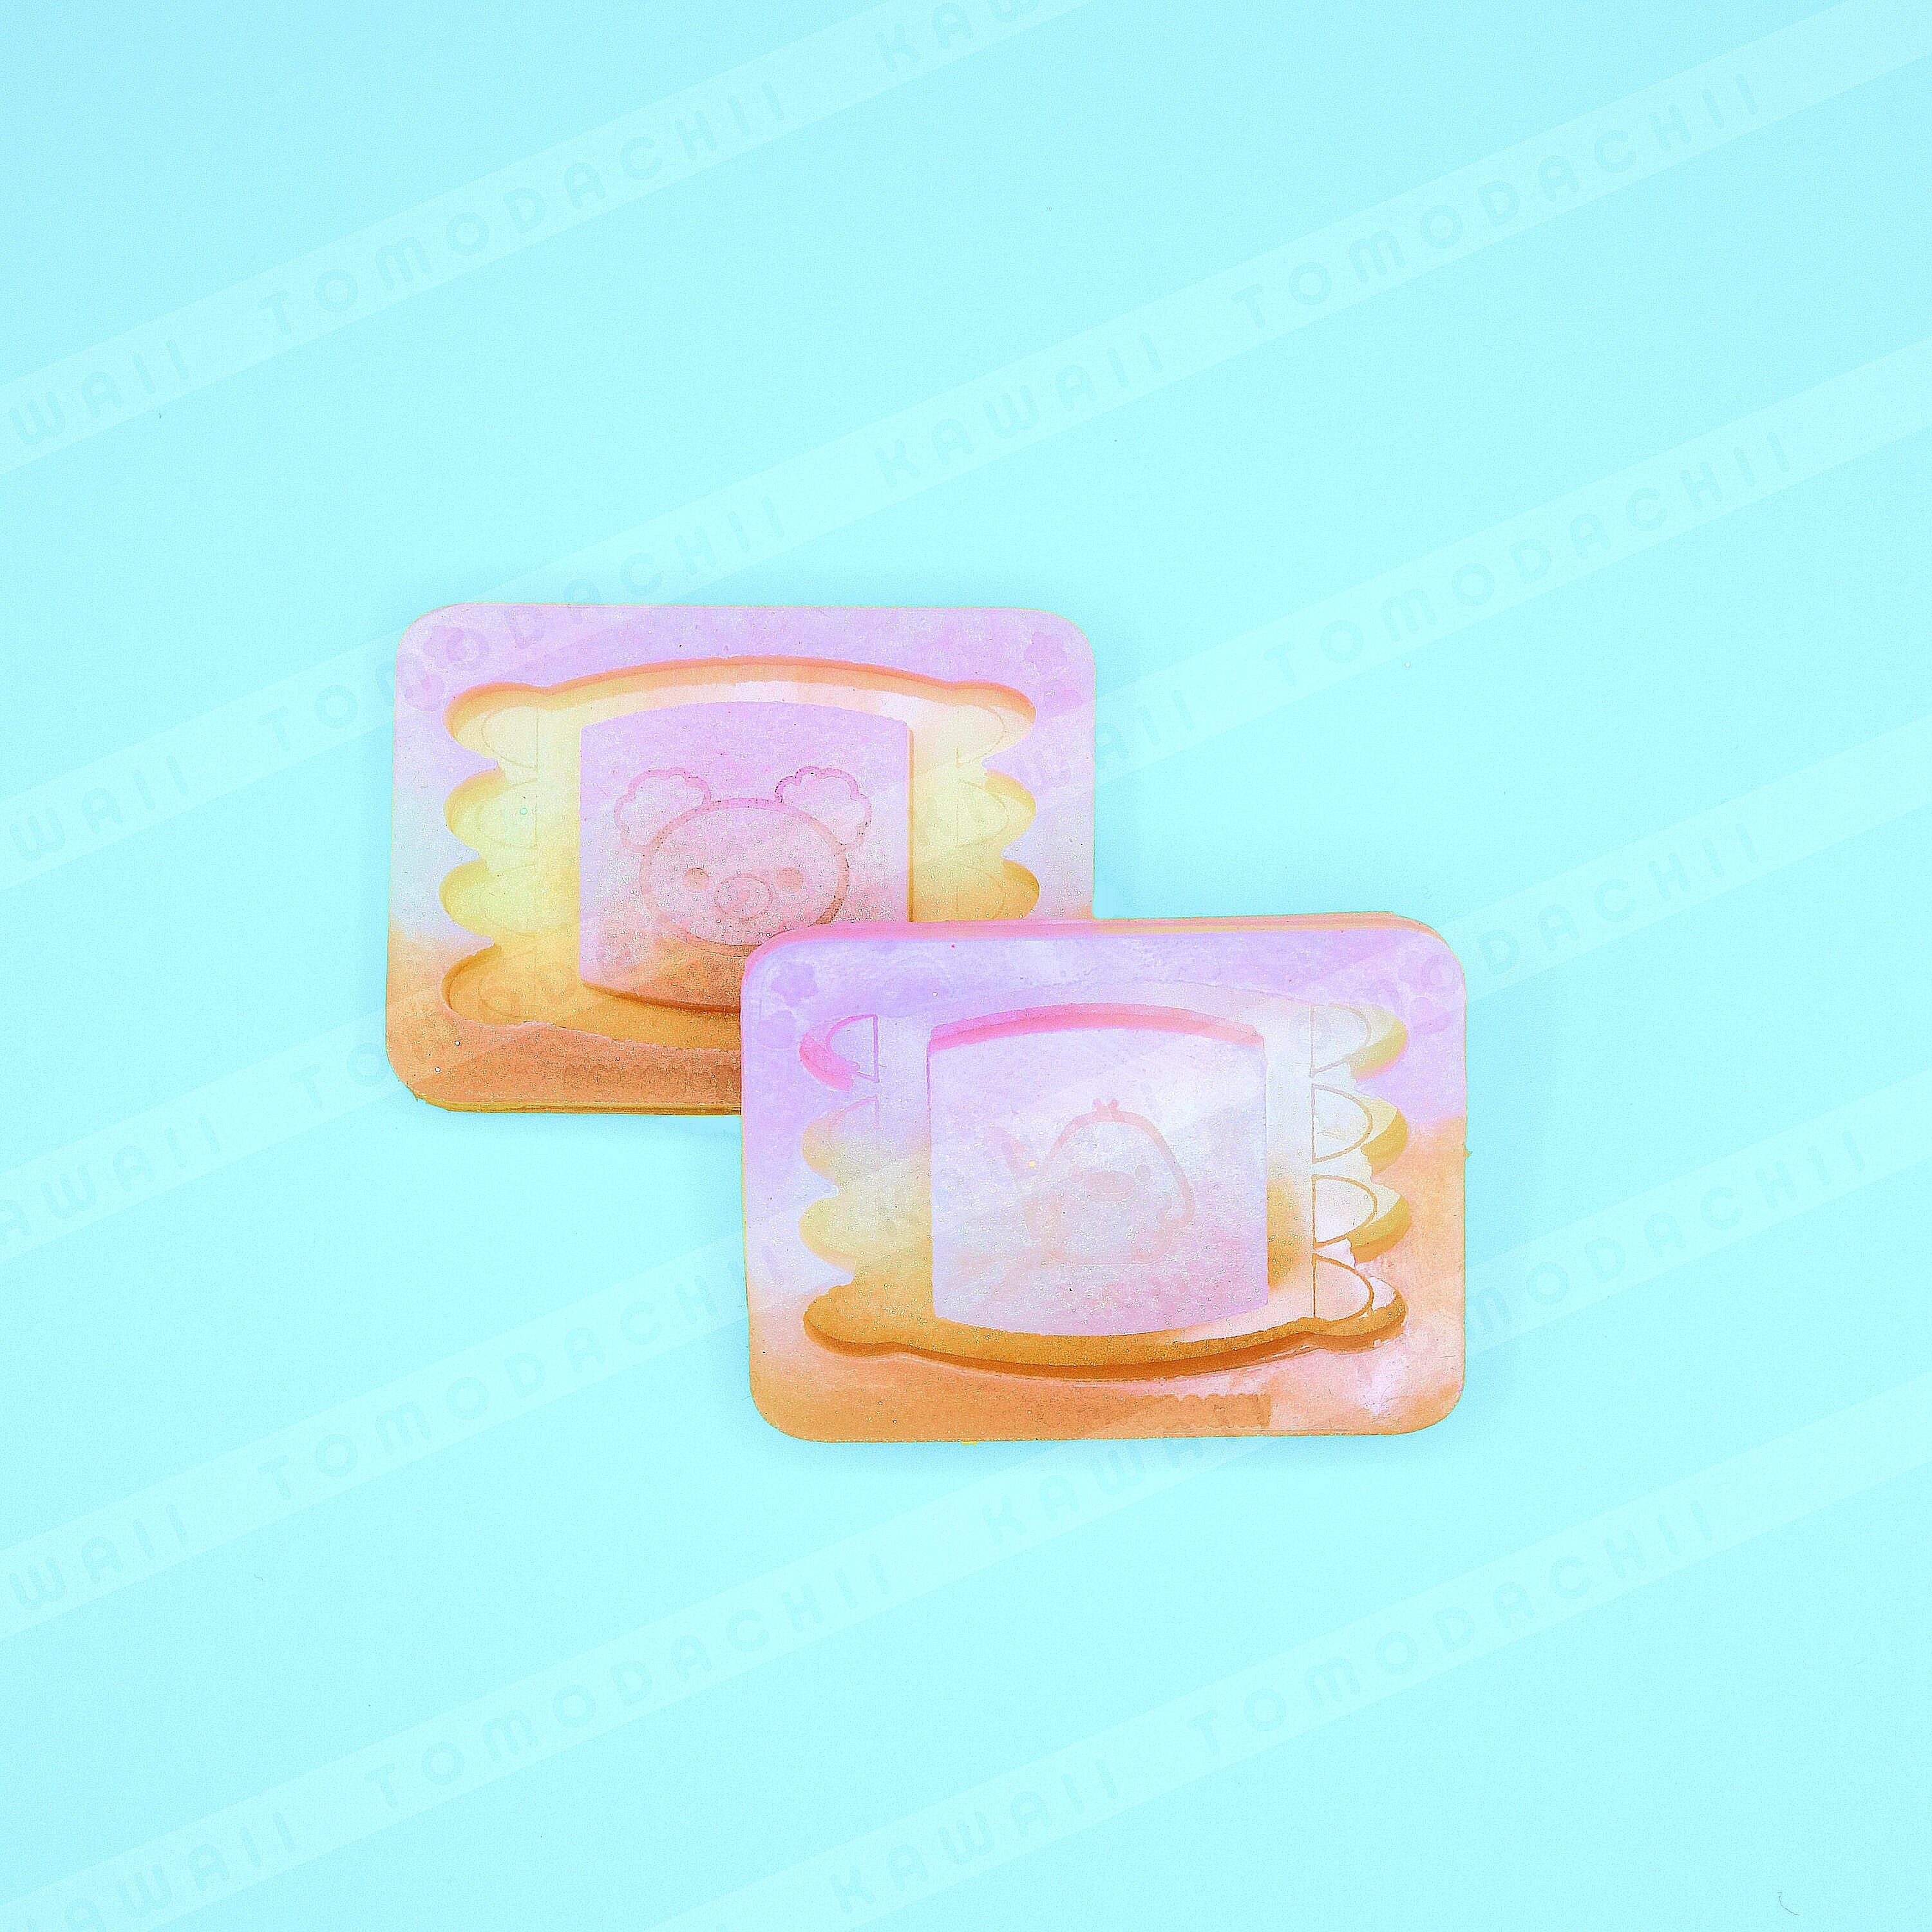 Small Double Cavity Heart Silicone Molds for Earring Cabochons